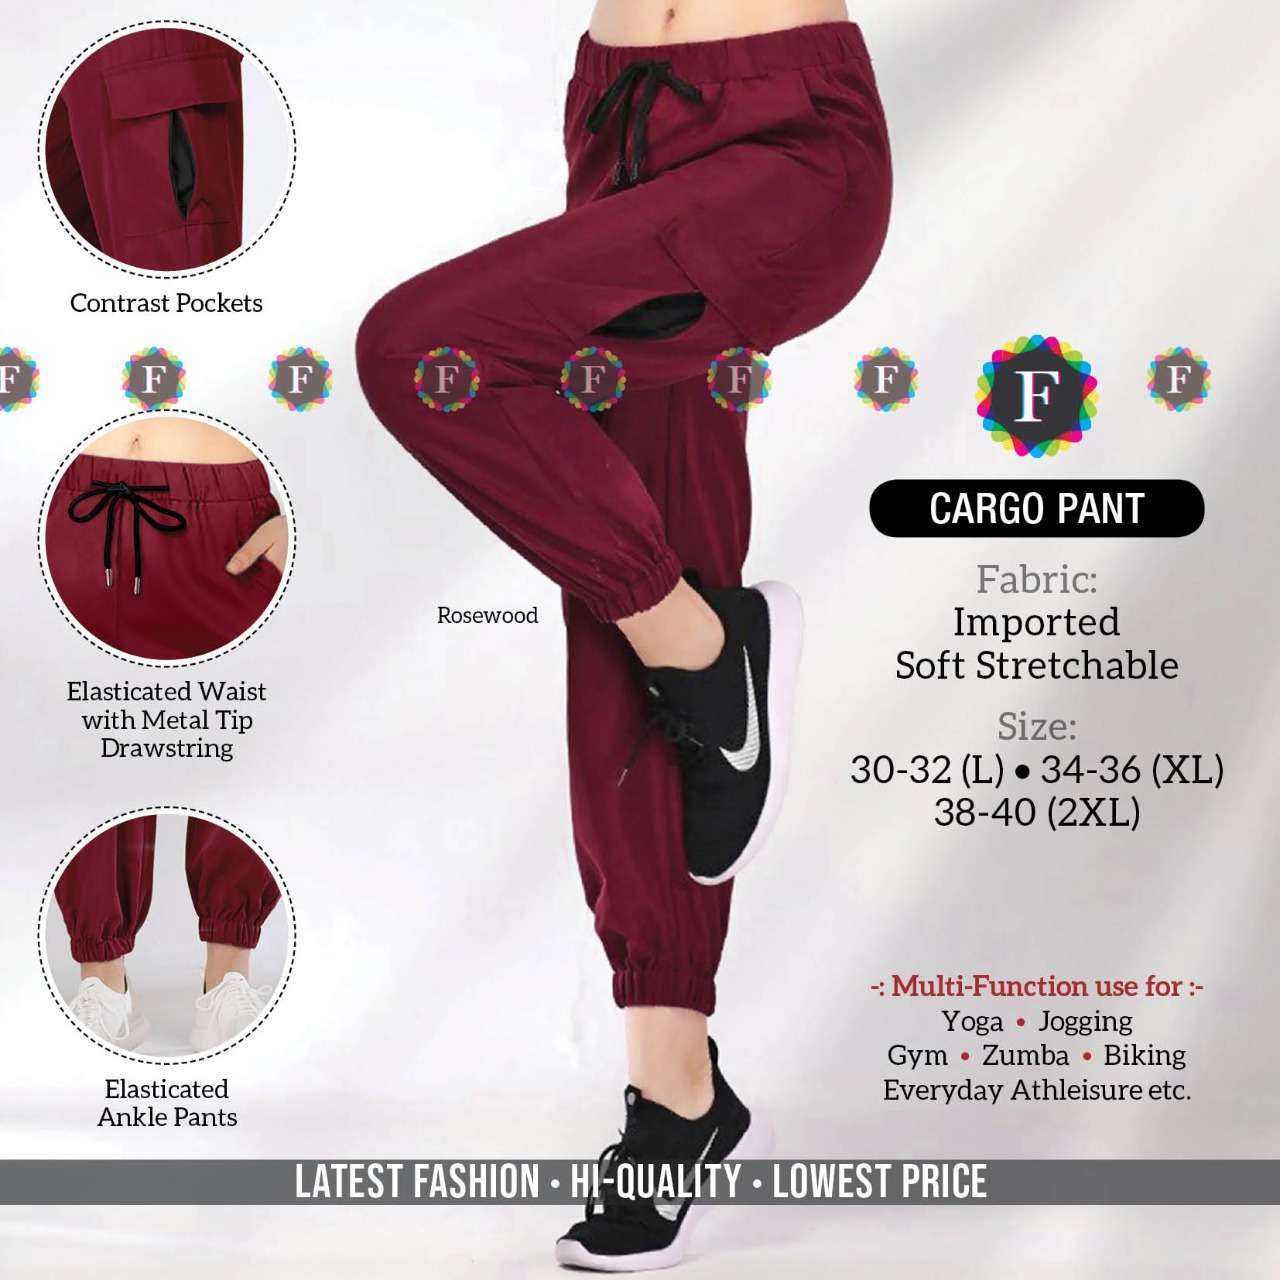 cargo pant imported soft stretchable pant 